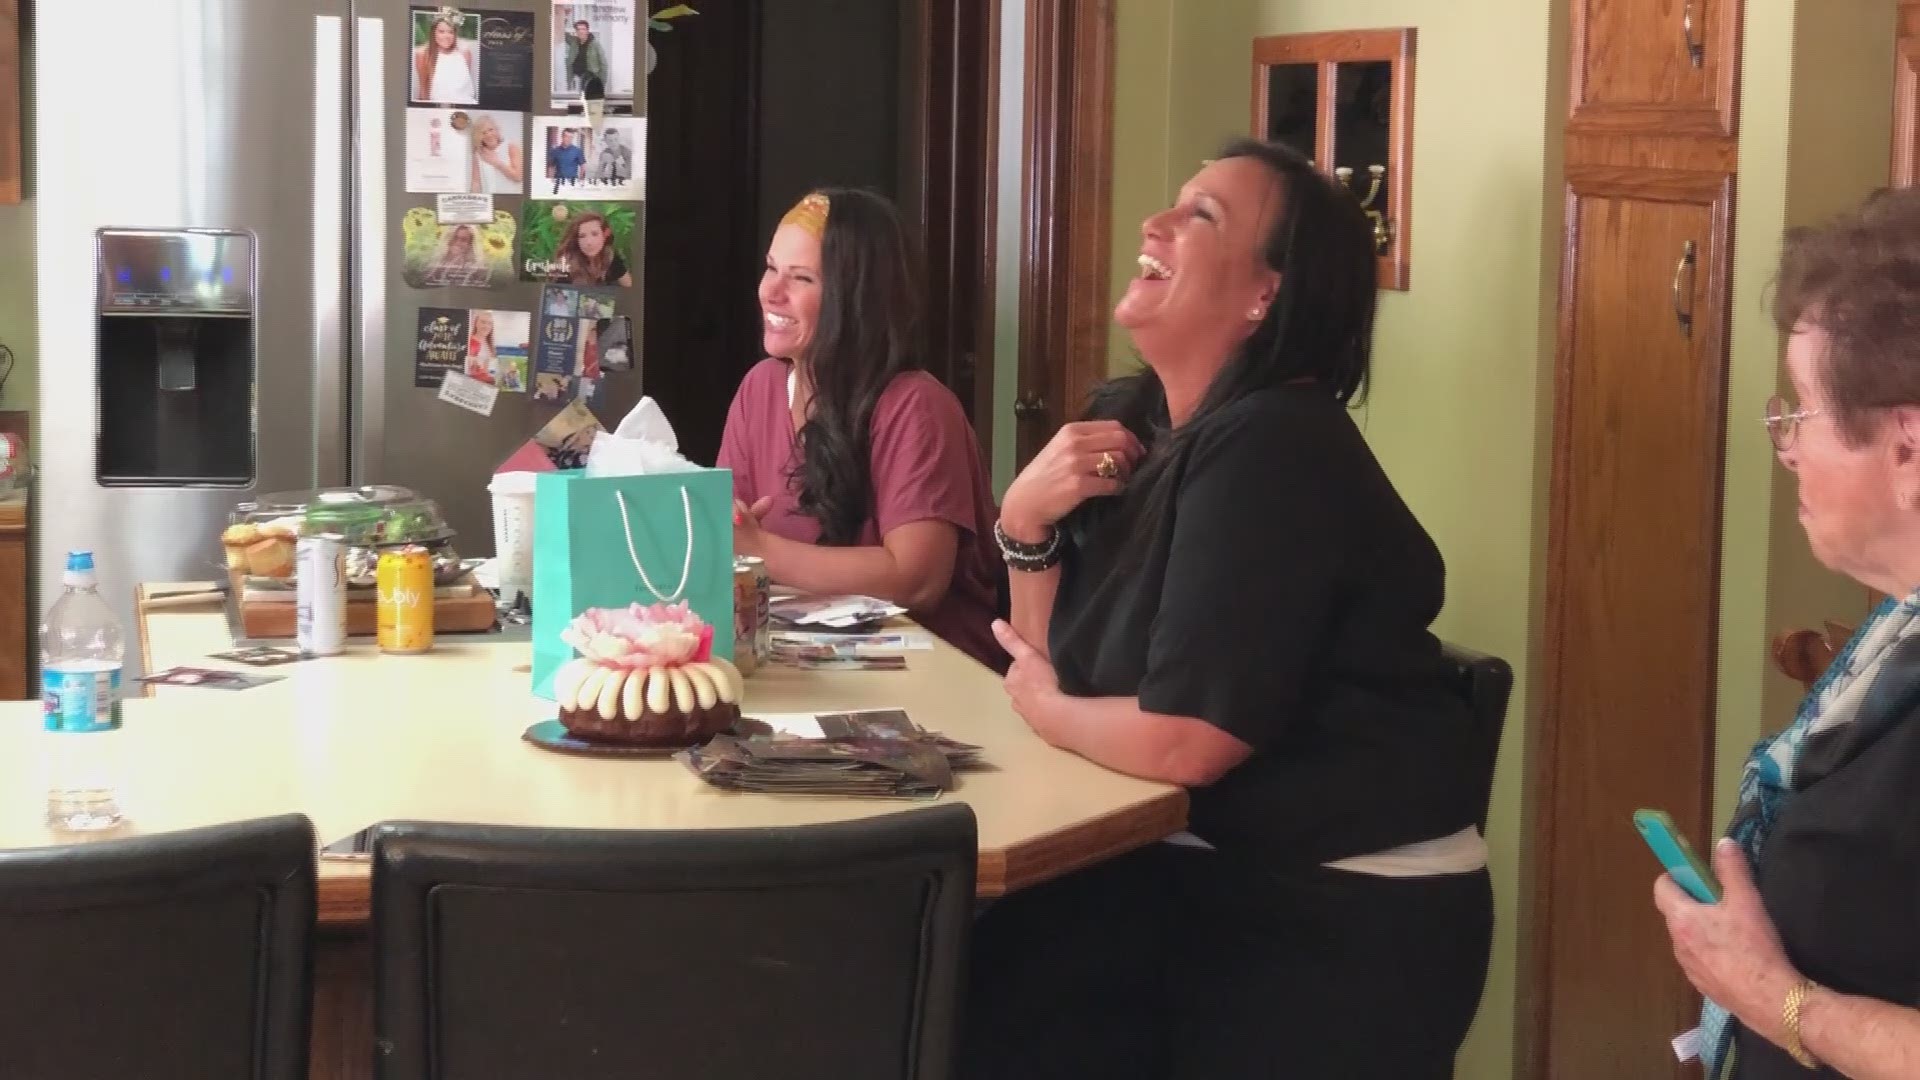 Once all the meetings were complete, Carrie's new-found family celebrated her birthday. So, they sang 'Happy Birthday' to her. Courtesy: Aaron Deckrow